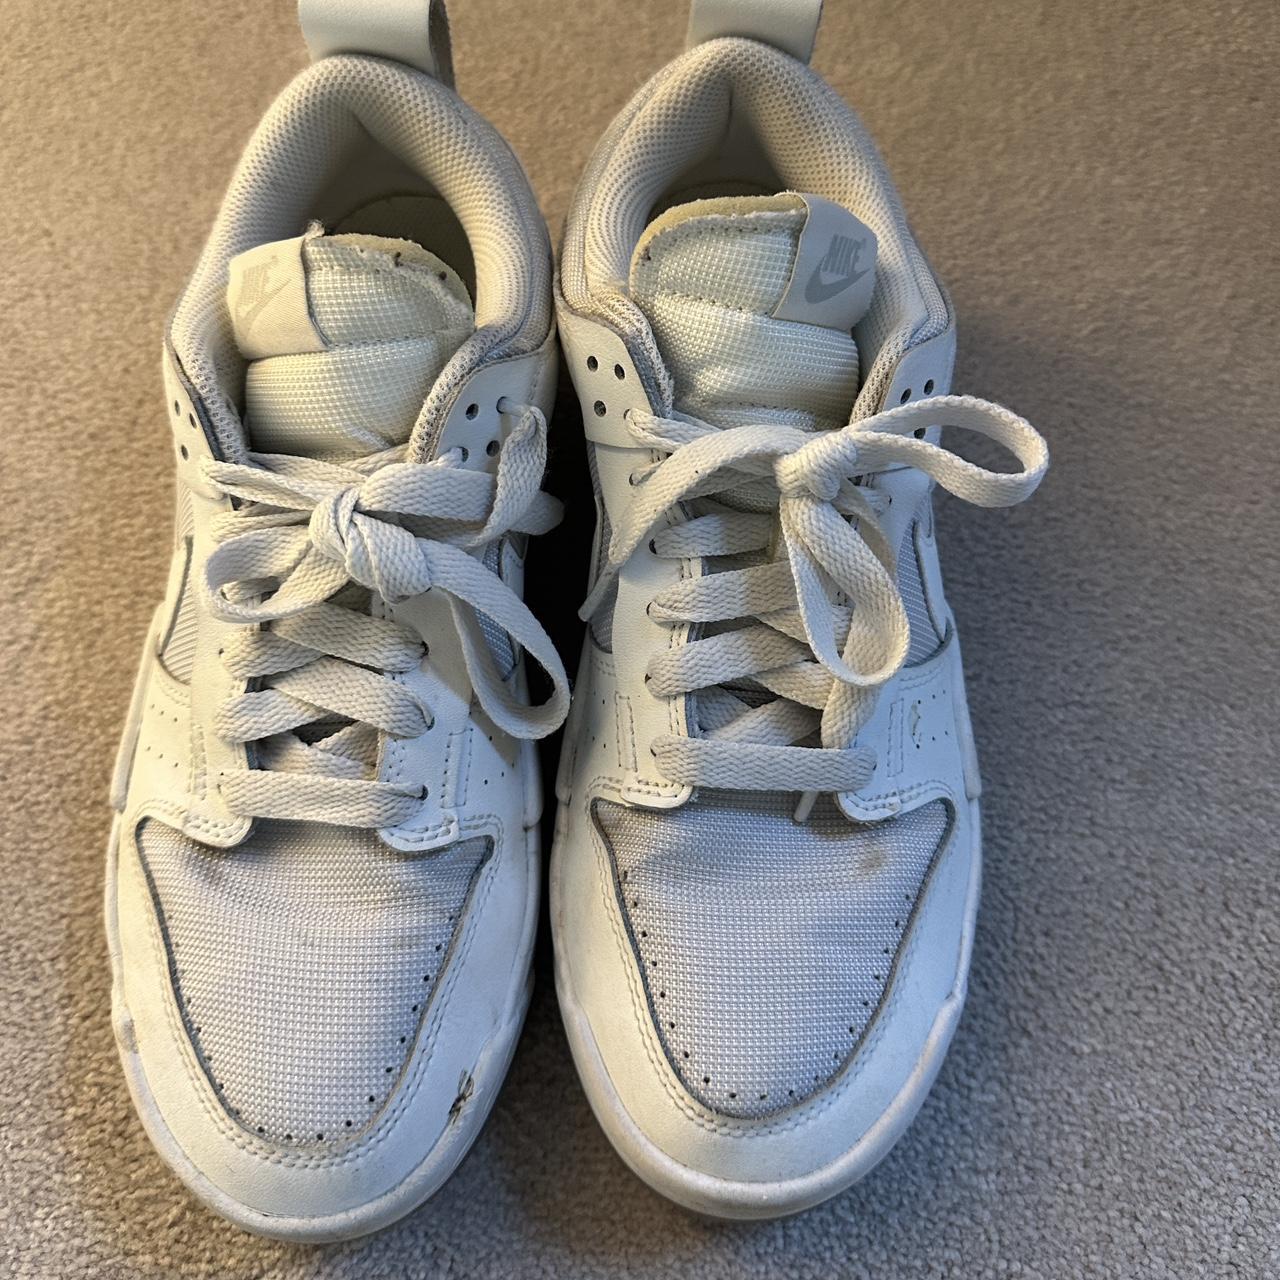 Nike grey dunks worn well and need a good clean... - Depop